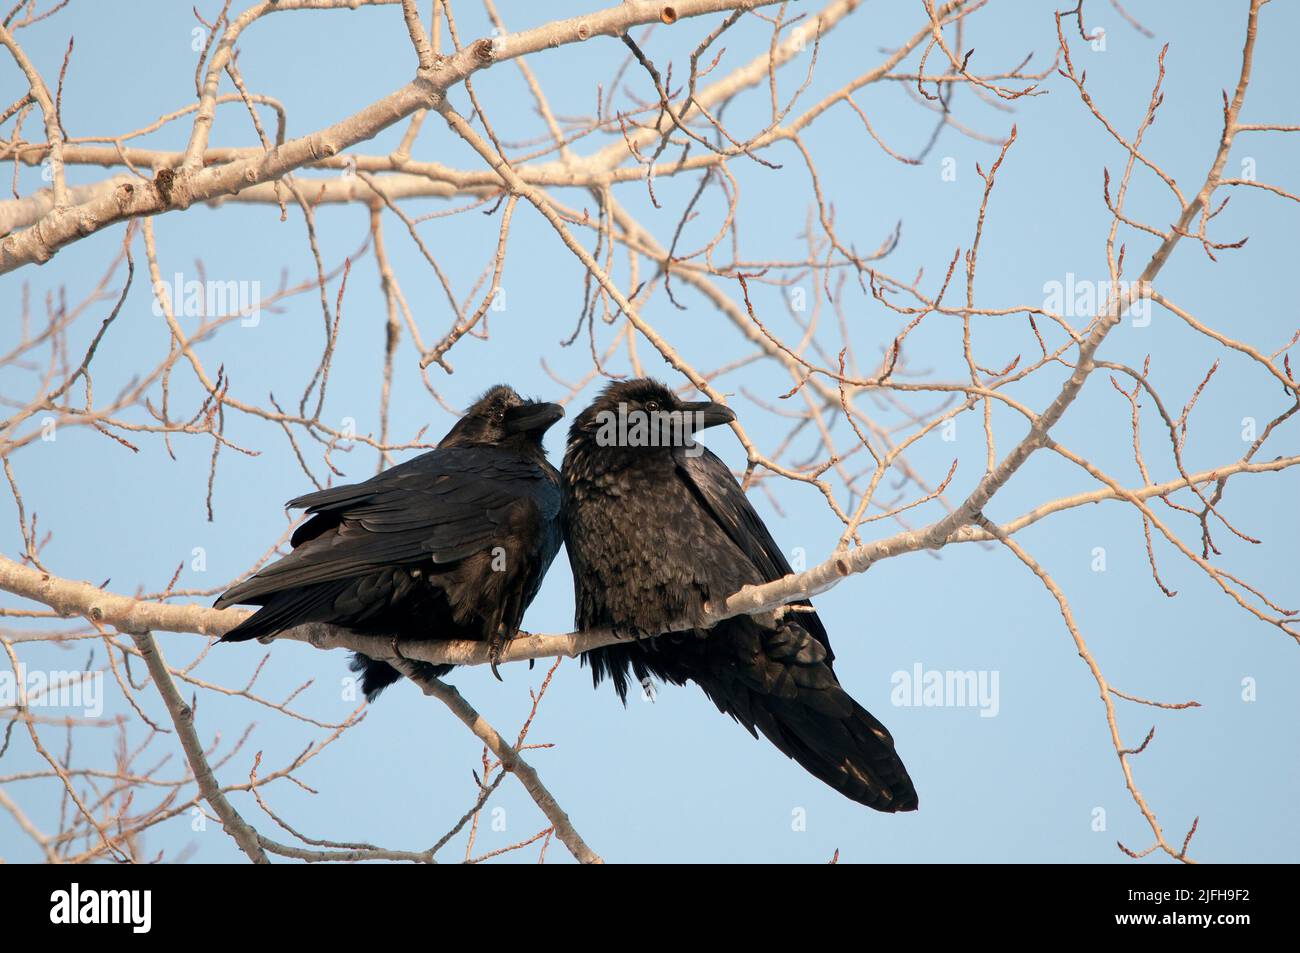 Raven bird couple perched close-up profile view with a blue sky background in its habitat and environment displaying their black feather plumage, beak Stock Photo